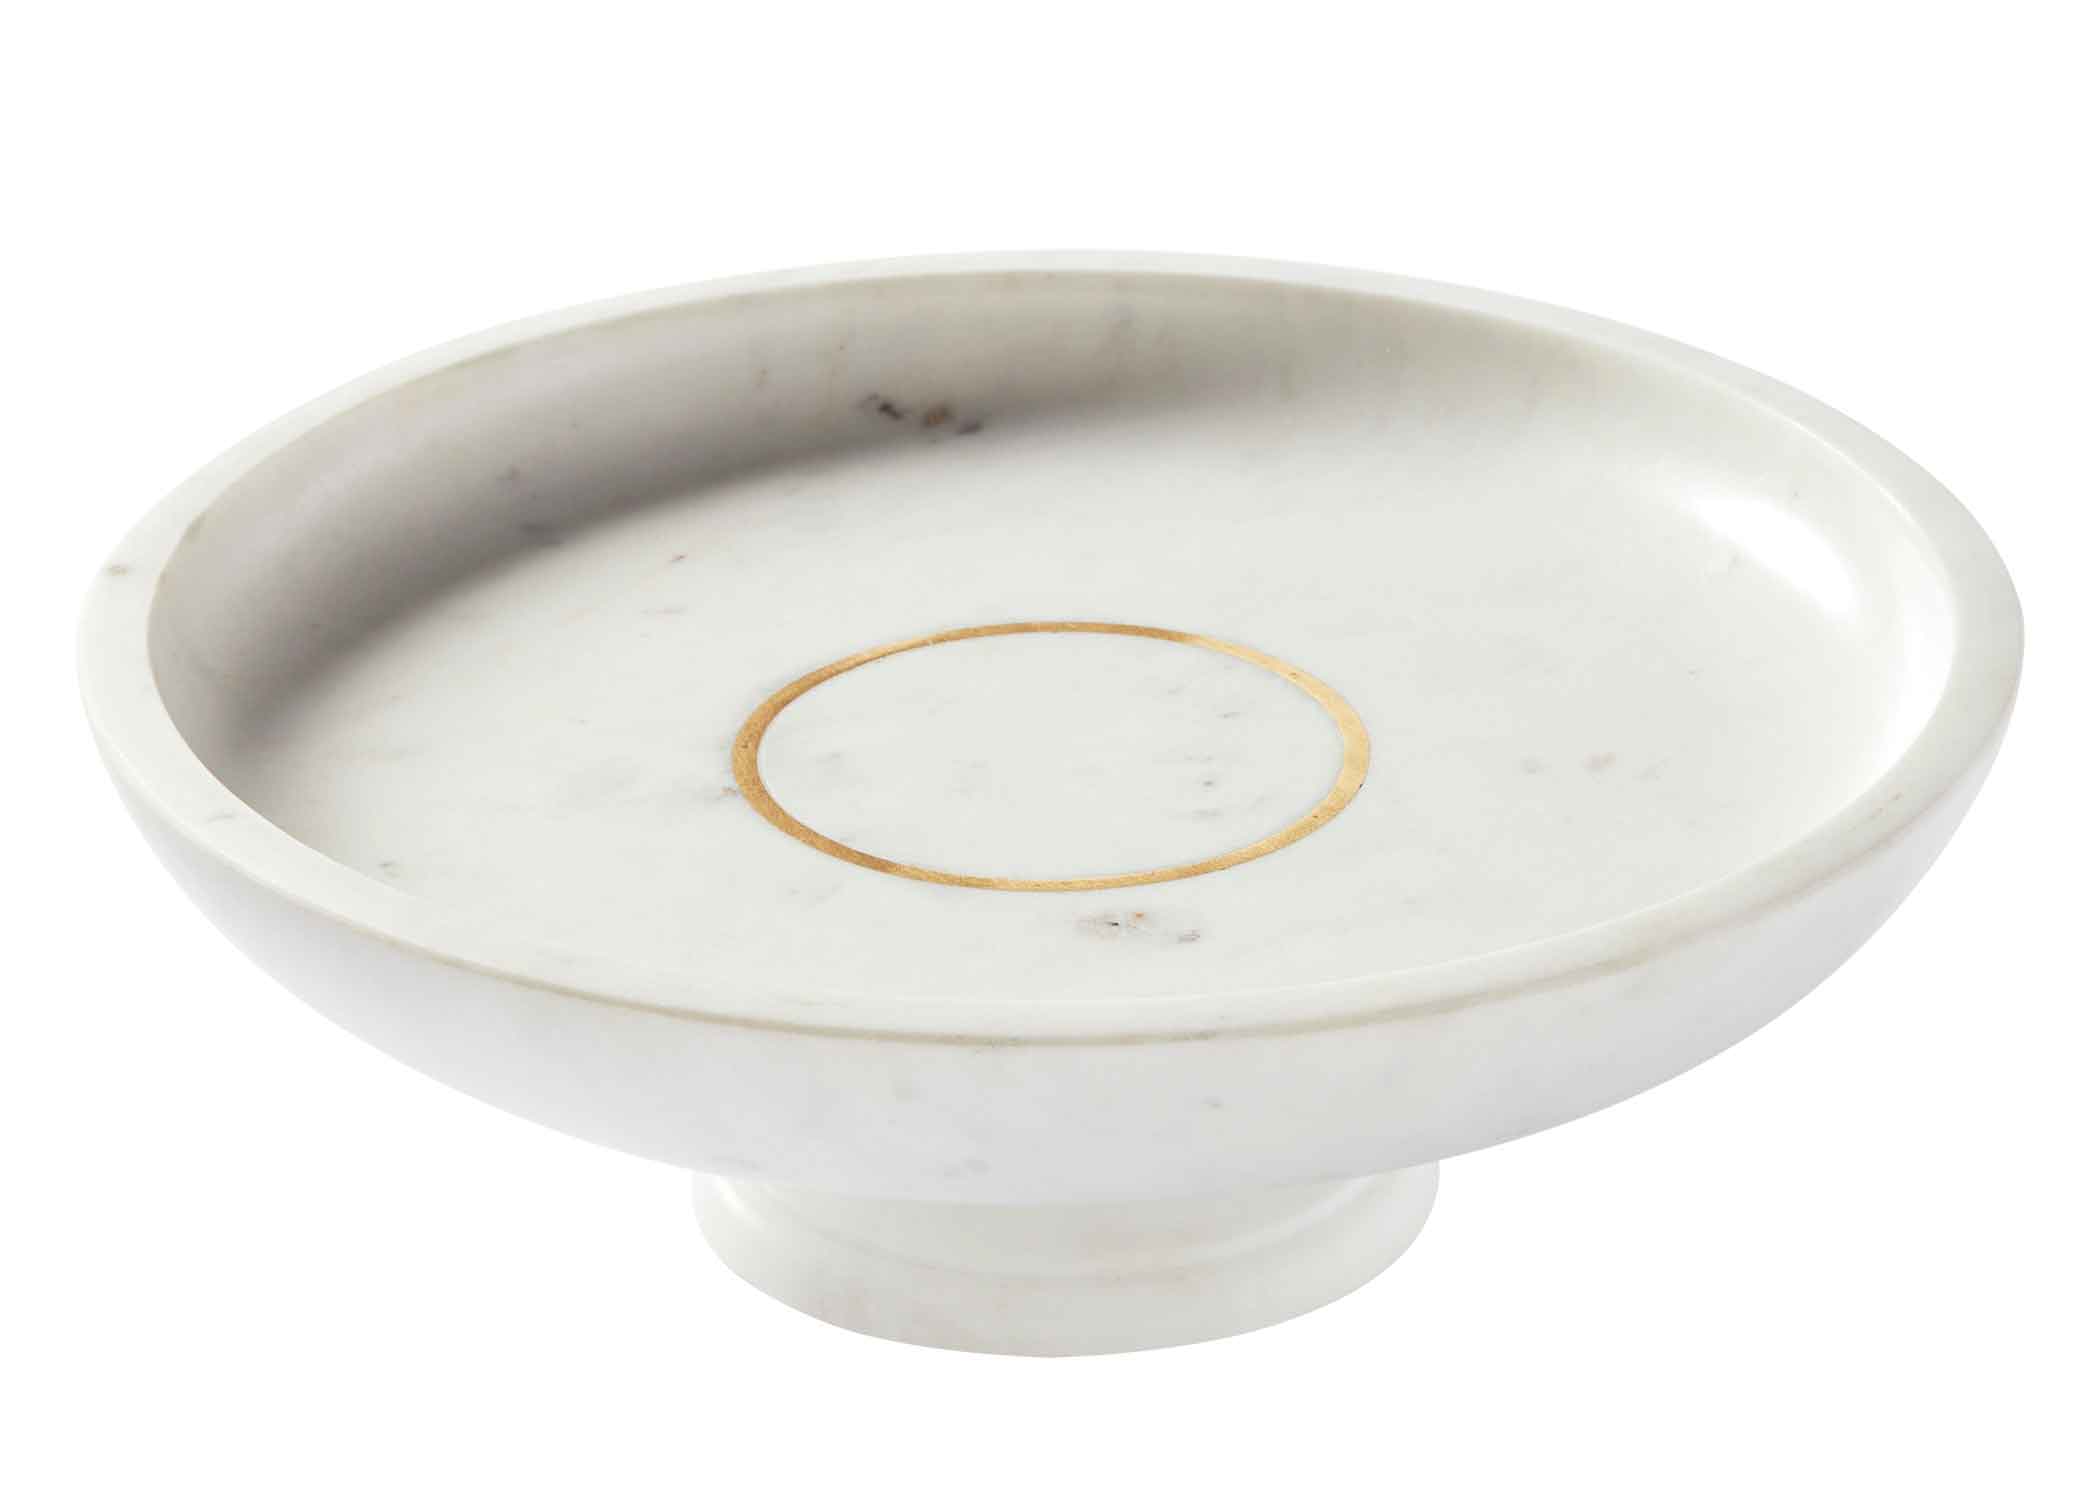 Serena and Lily's marble-and-brass Millerton Footed Fruit Bowl